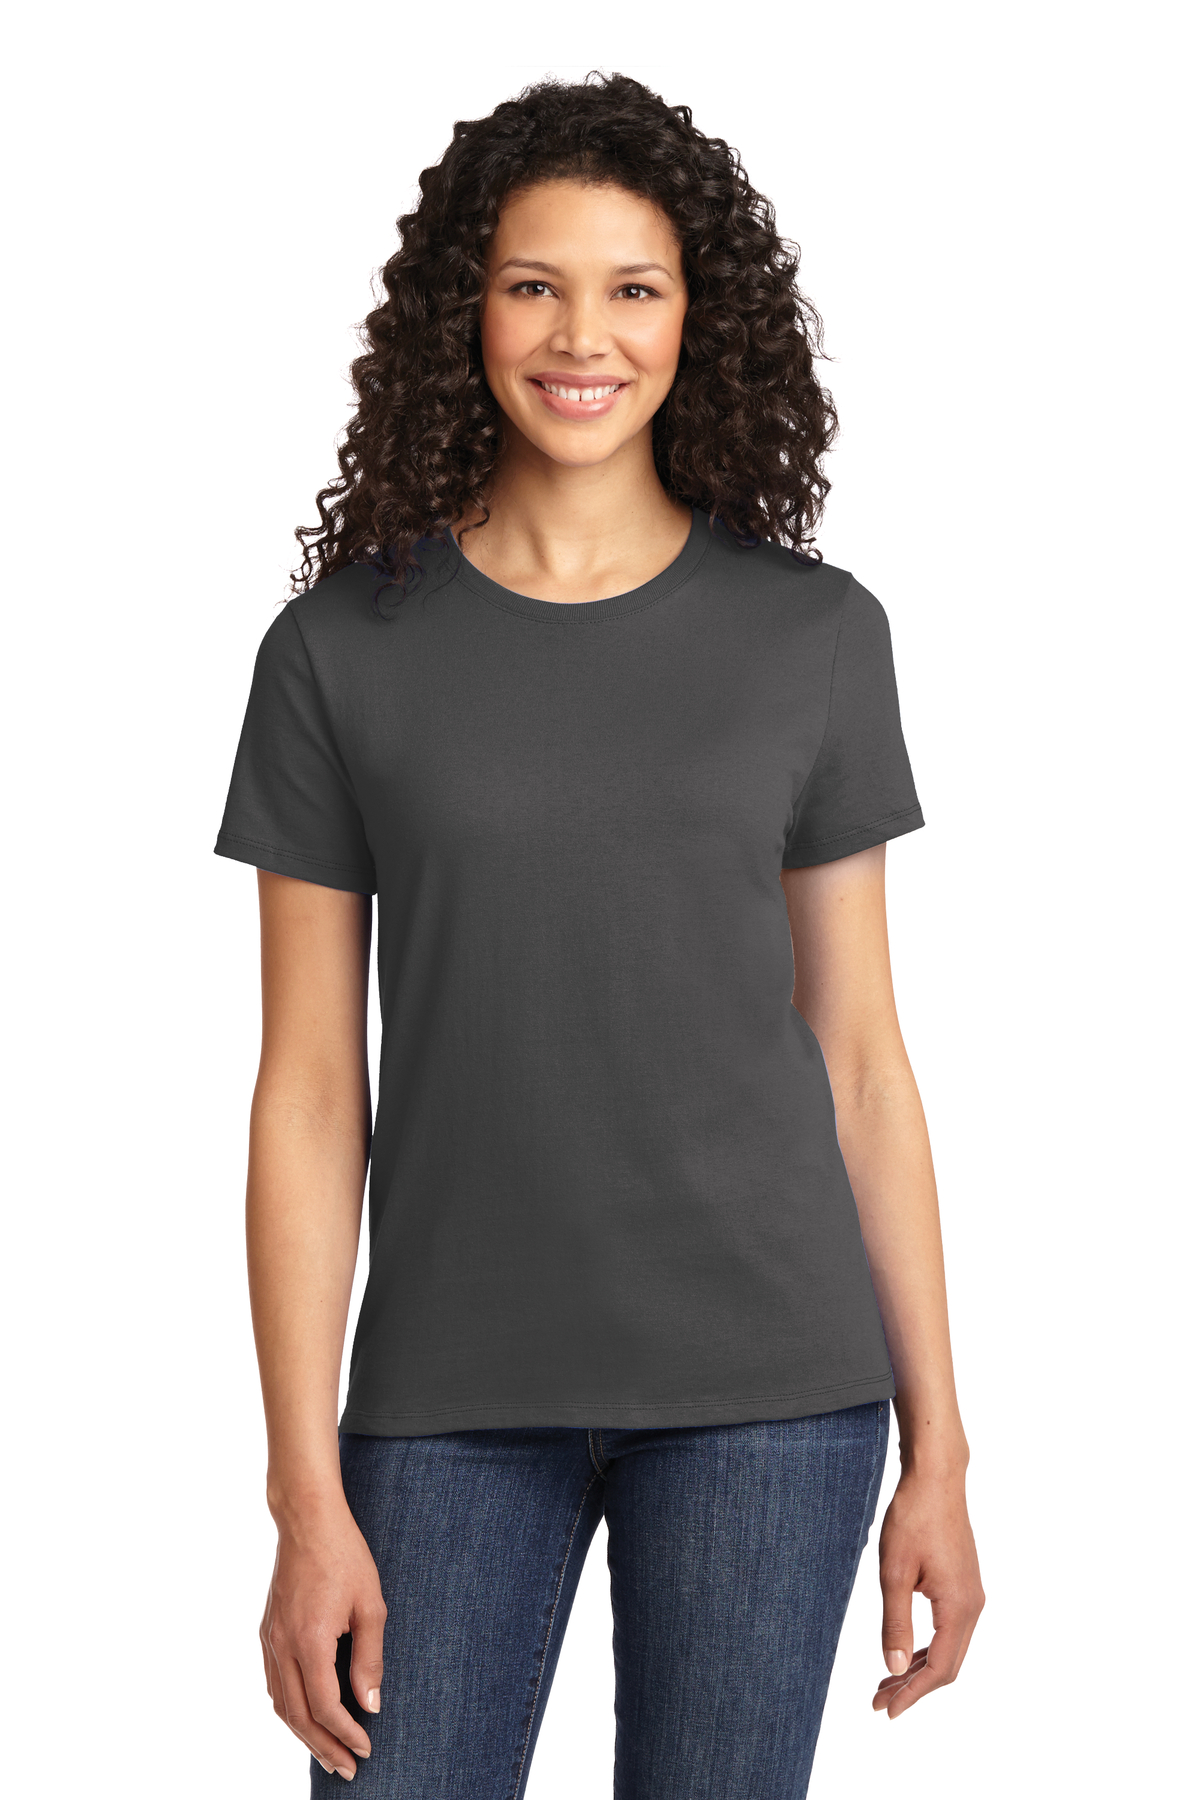 Port & Company Embroidered Women's Essential Tee | Women's Apparel ...